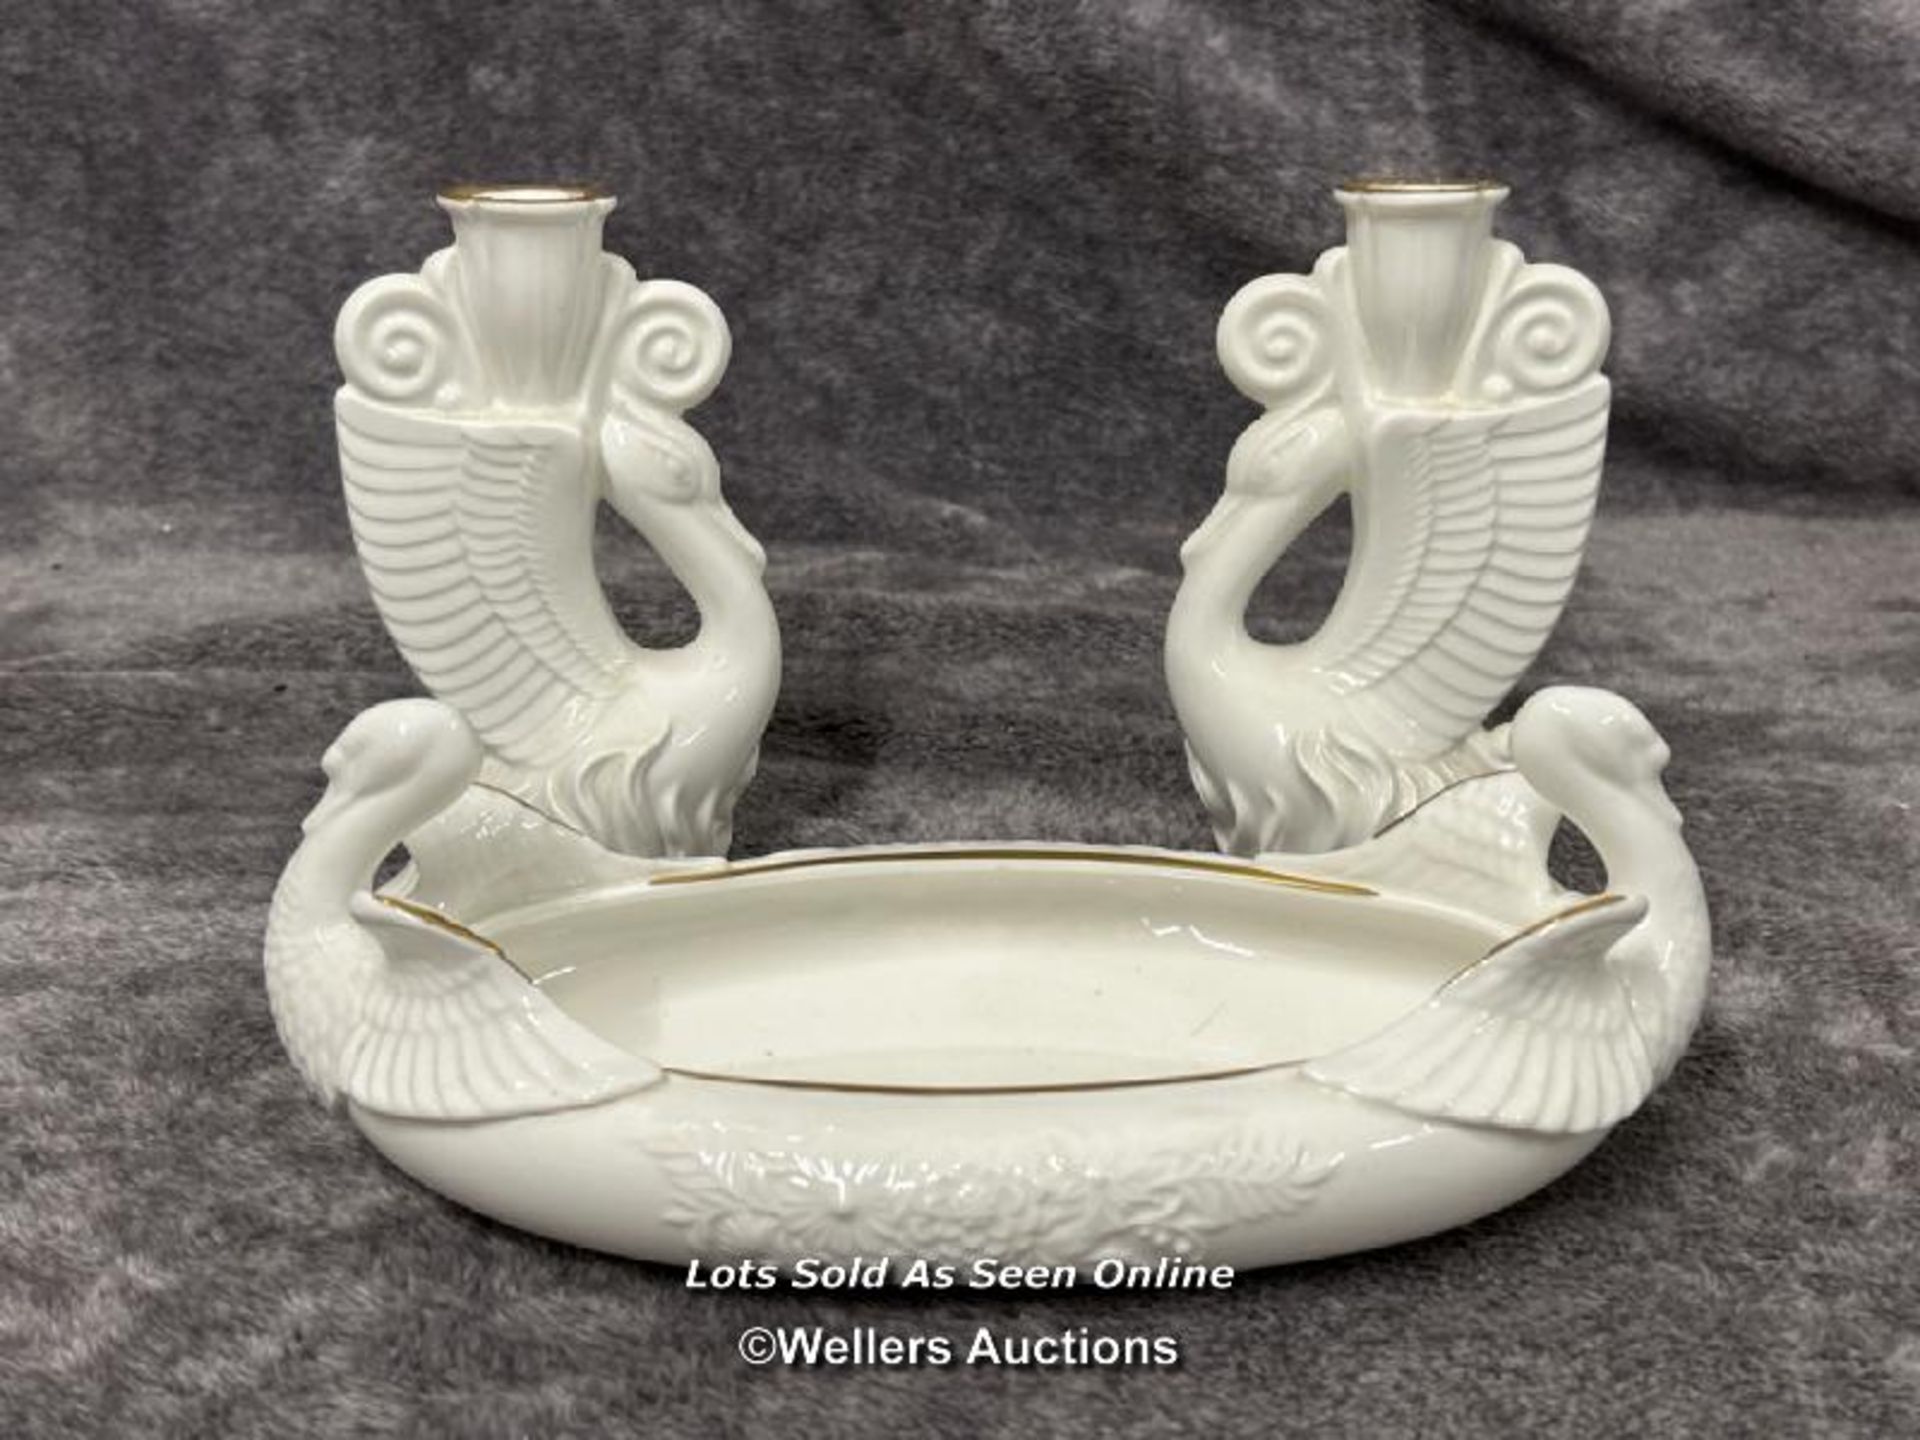 Crown Ducal A1484 pattern jug and teapot with base, pair of Royal Doulton Swan candlesticks and oval - Image 4 of 8